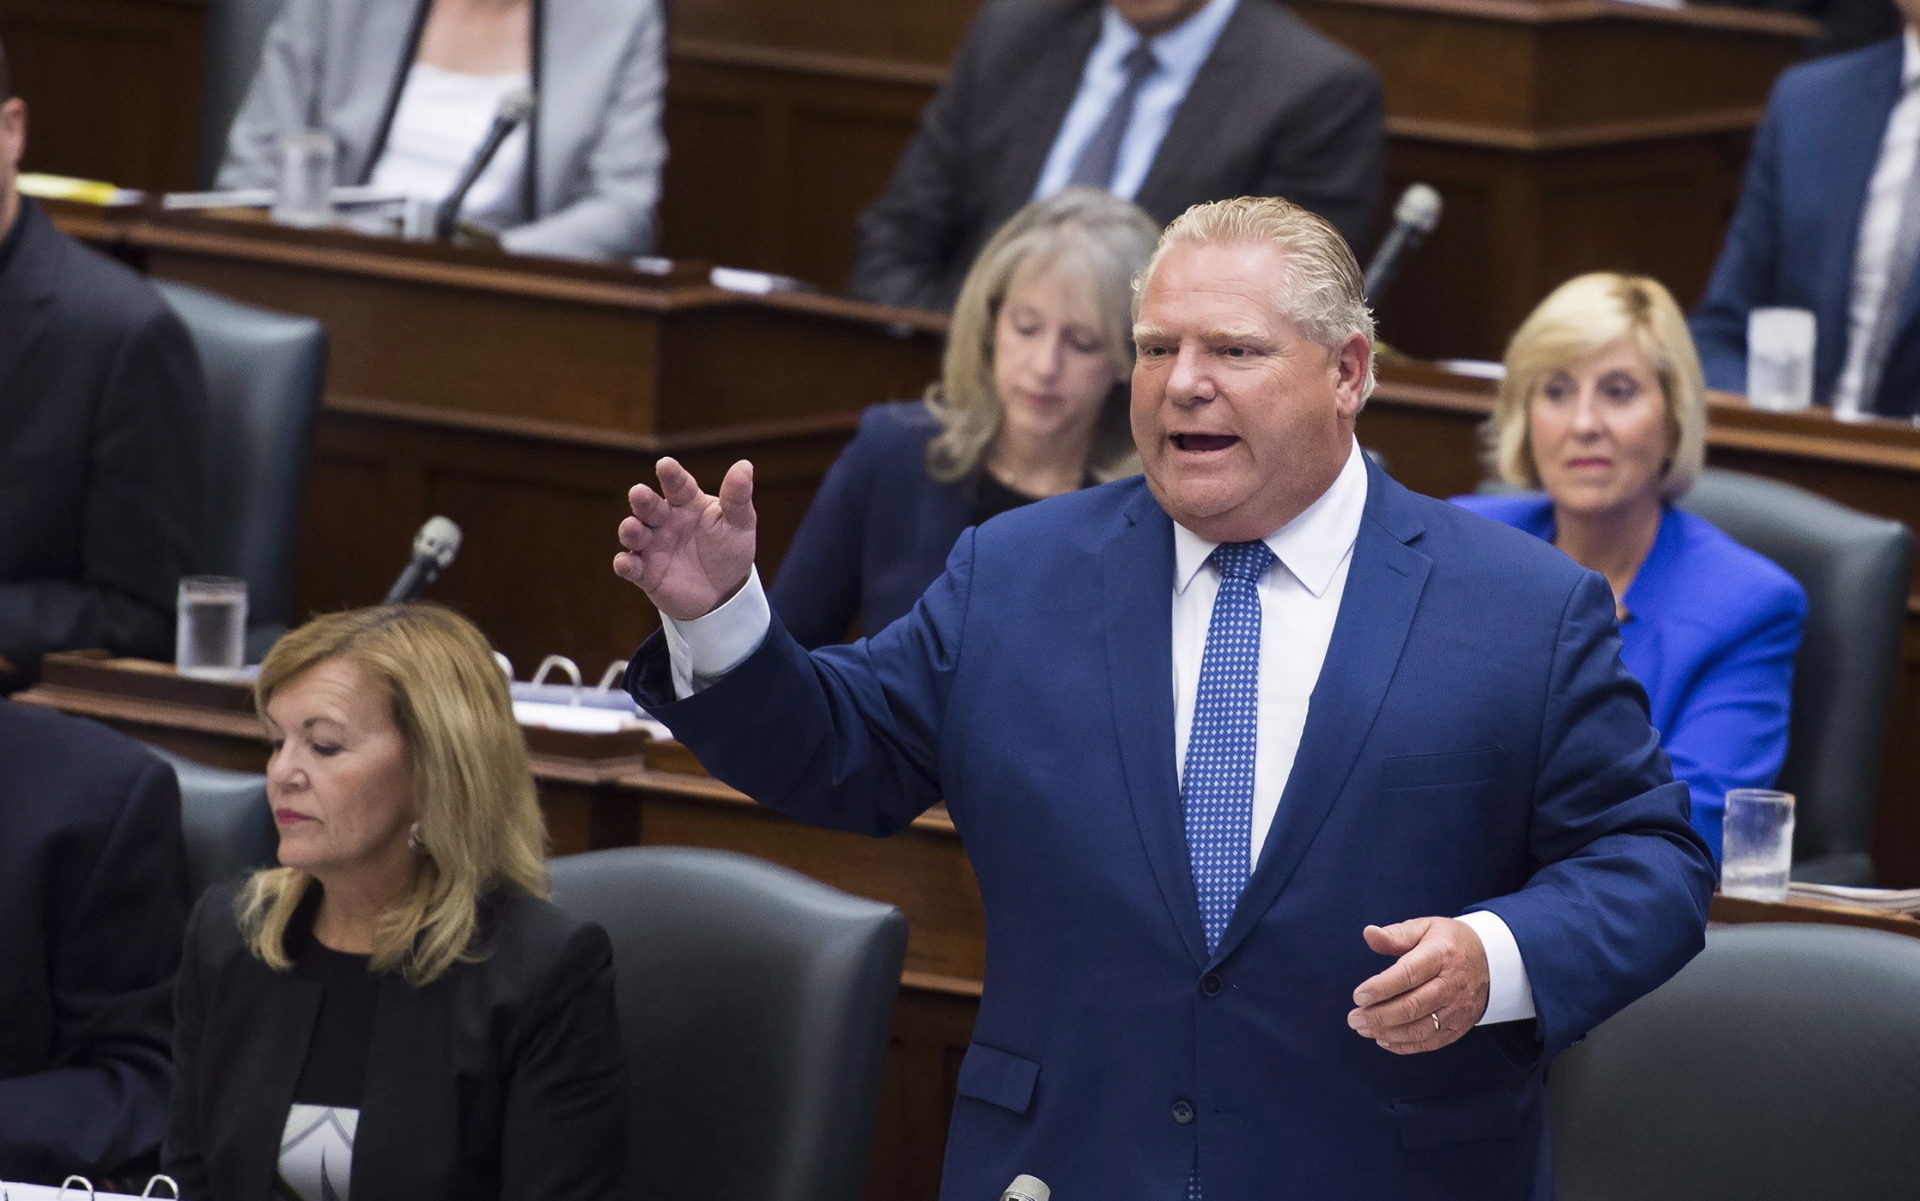 Ontario Premier Doug Ford speaks in question period in side the legislature at Queen's Park in Toronto on Monday, Sept. 17, 2018. (source: THE CANADIAN PRESS/Nathan Denette)